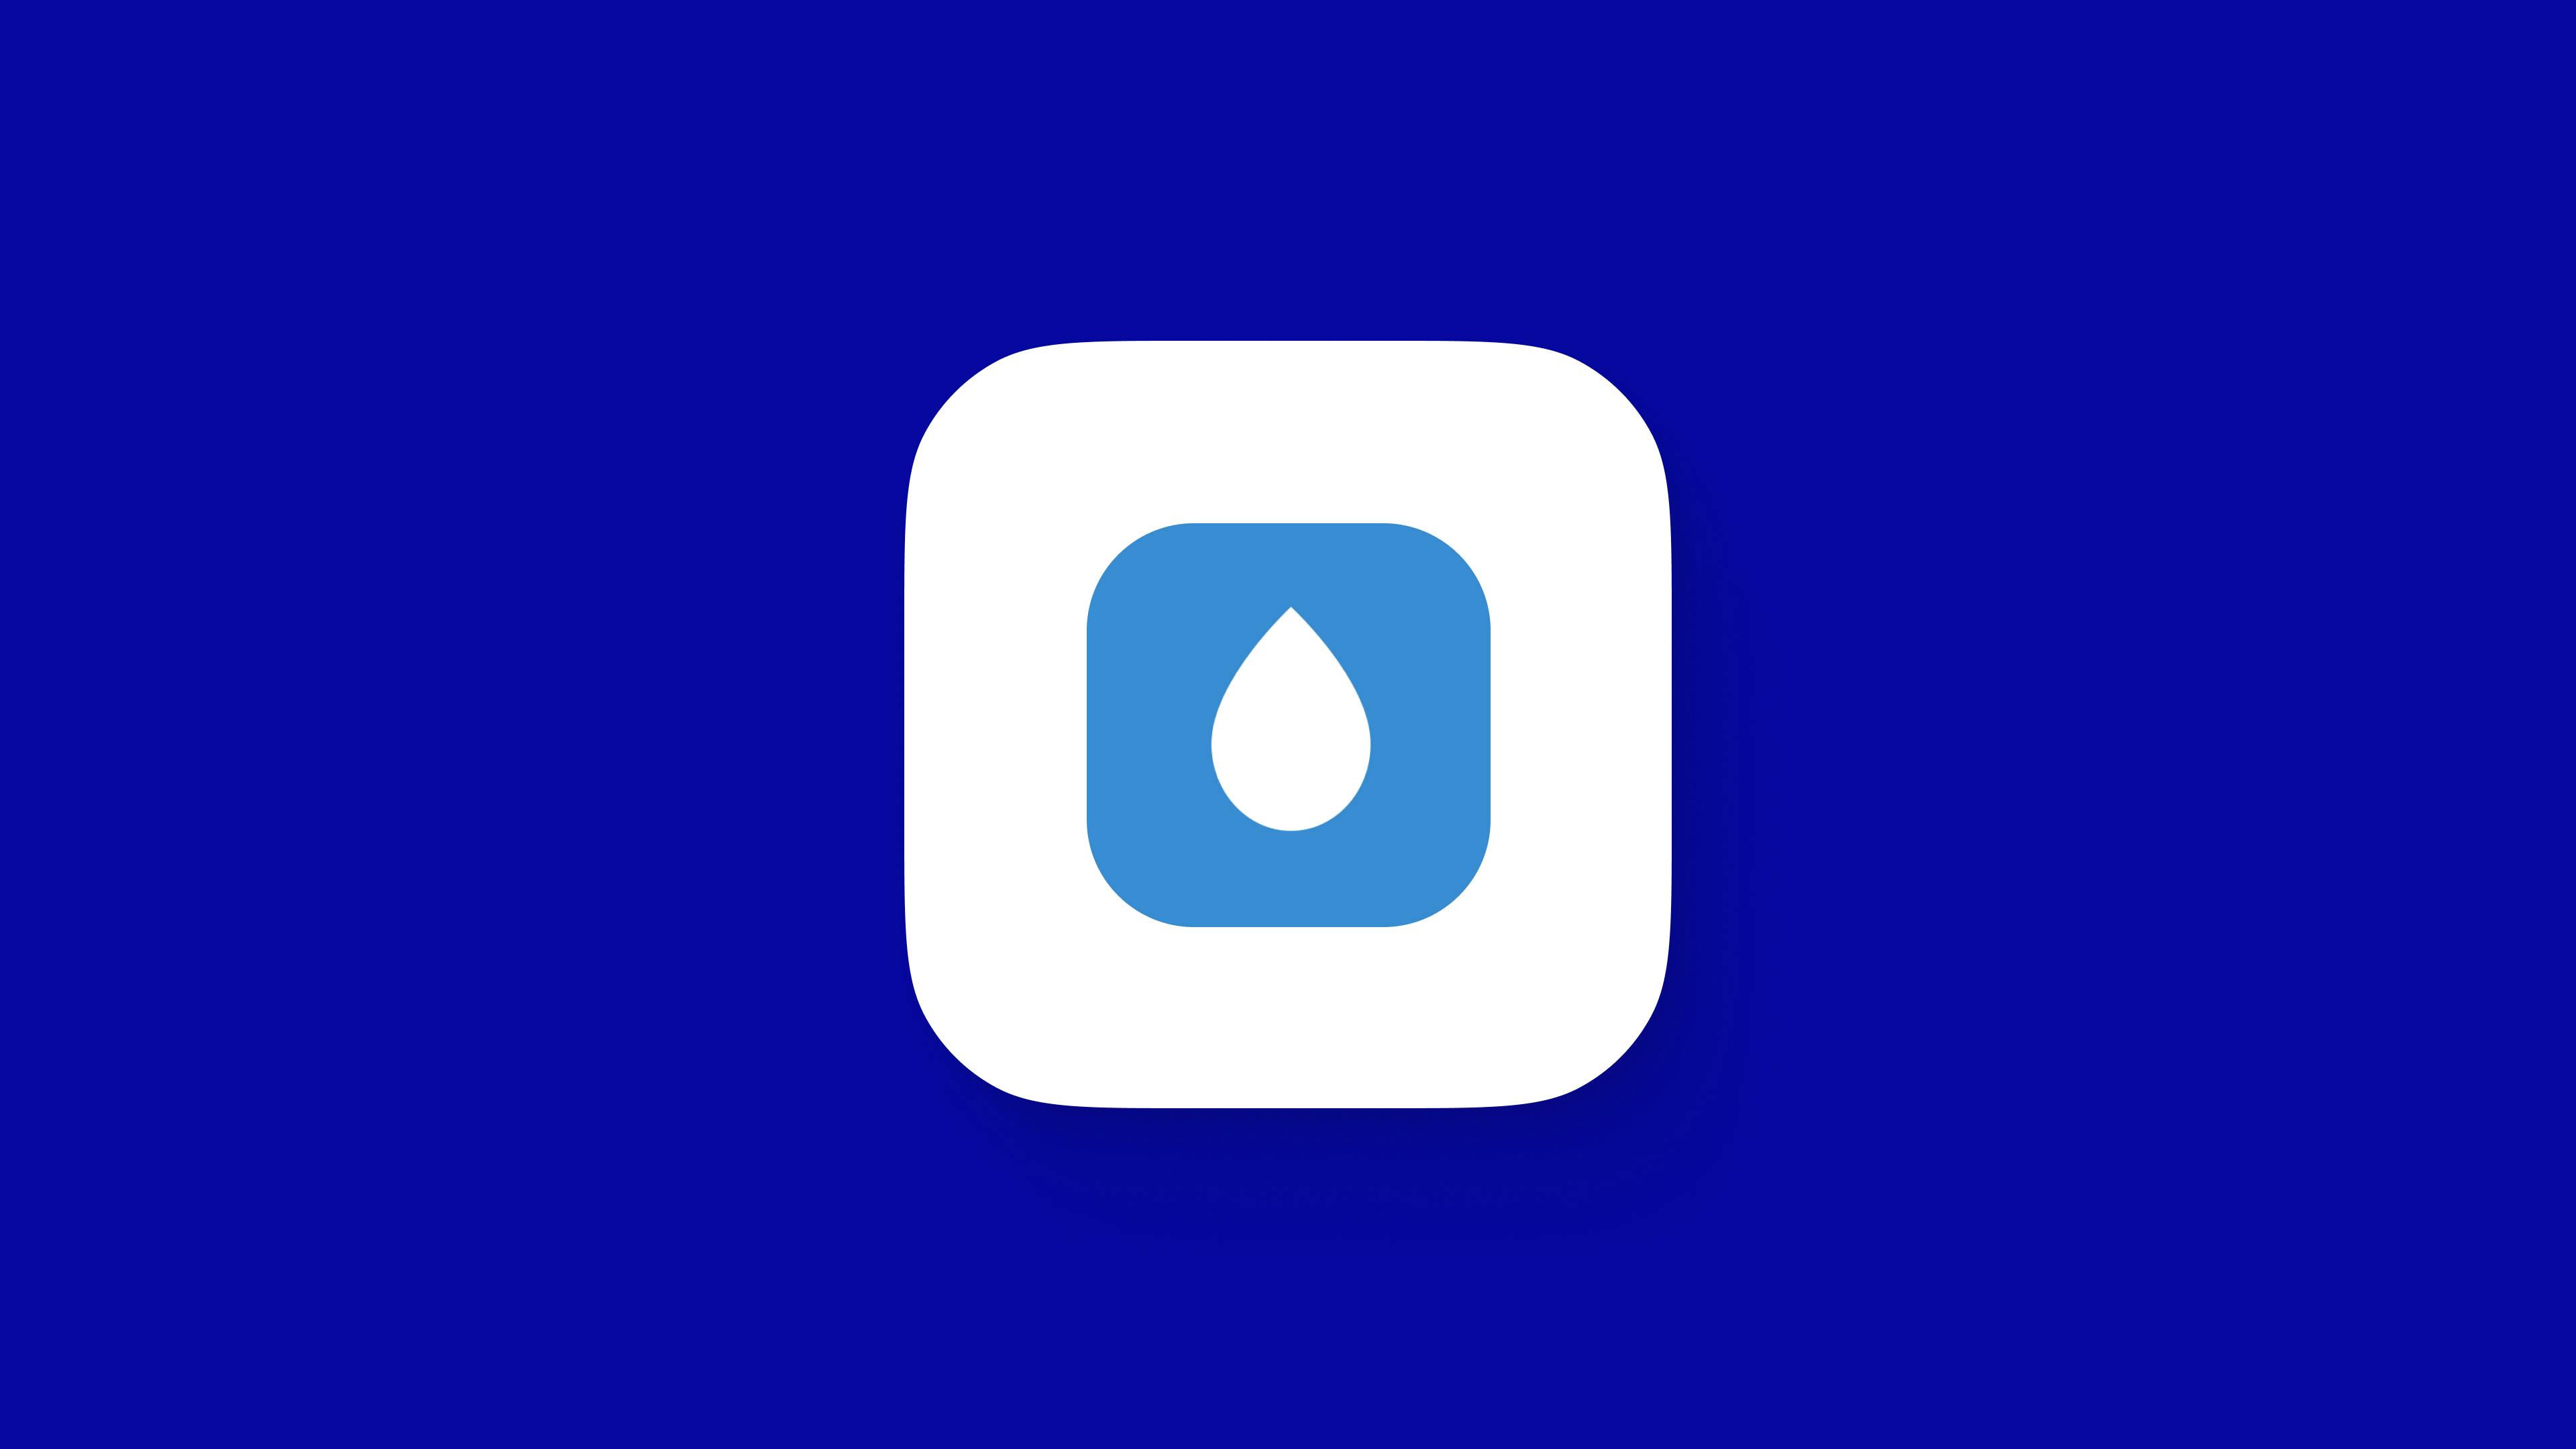 My Water - Apps for self-improvement - Headway App